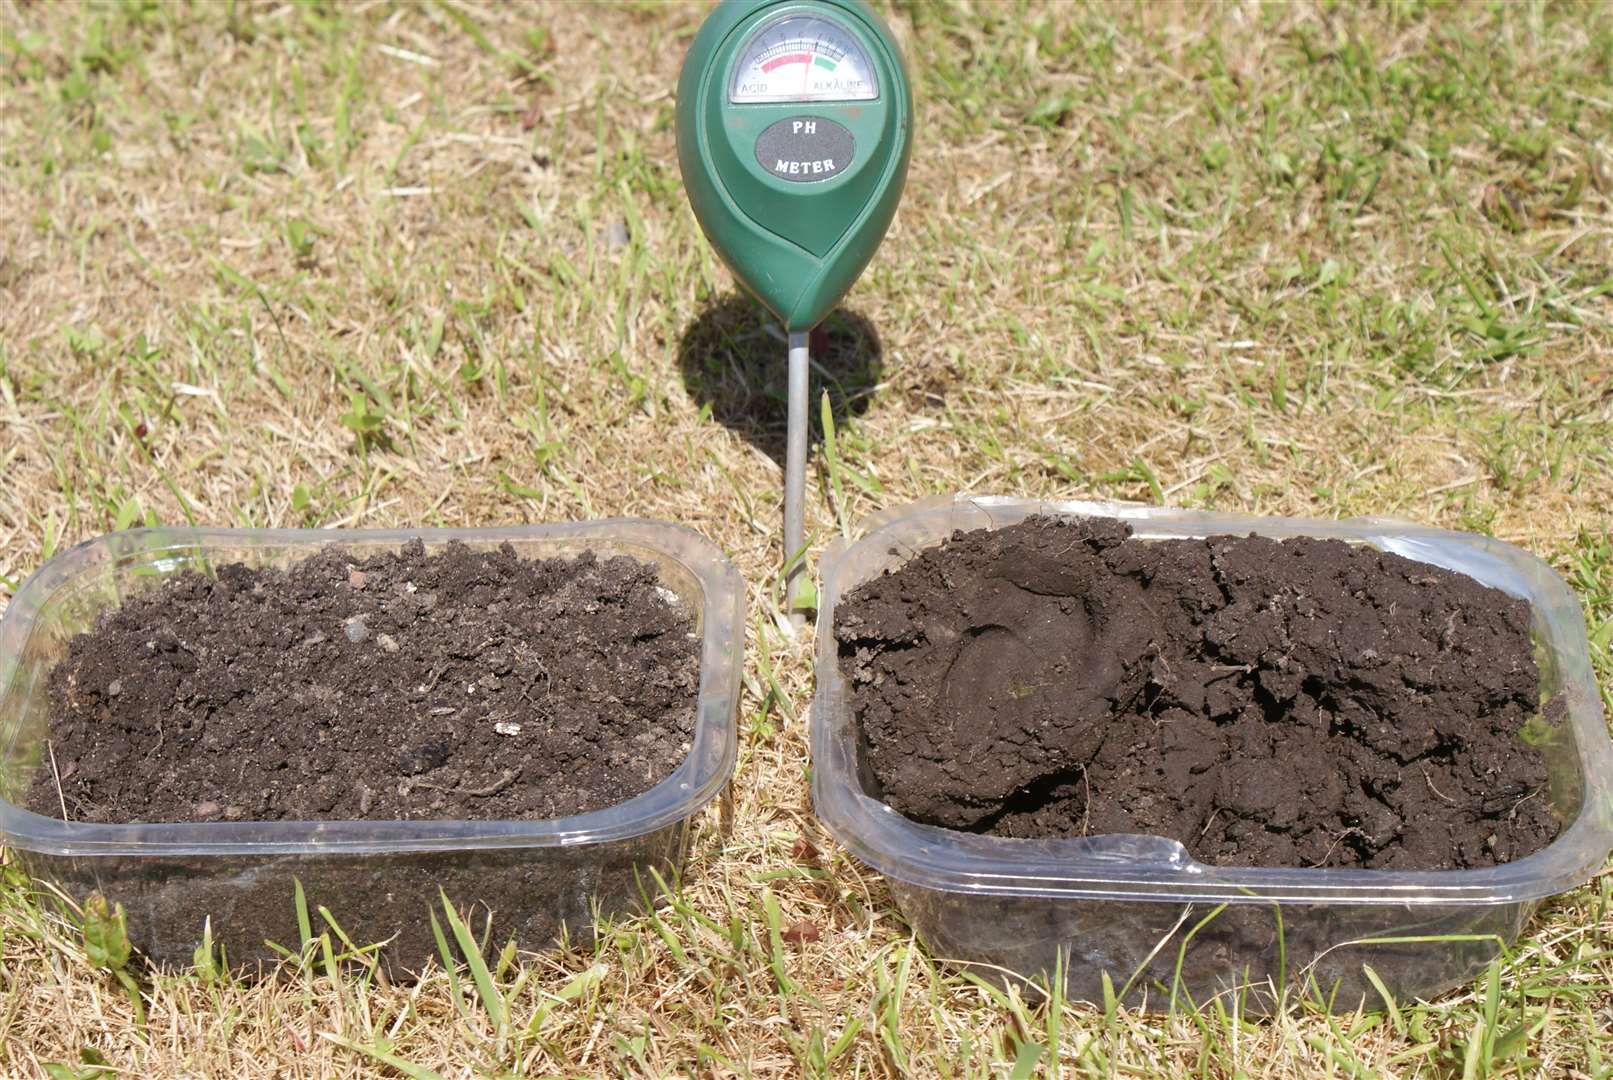 The 'virgin' clay soil on the right – note the piece to the left of the sample with the thumprints in it. To the left is soil that has been improved by previous occupants – its texture is much more open and friable. In the centre is a pH meter, showing that the soil is neutral at pH 7.